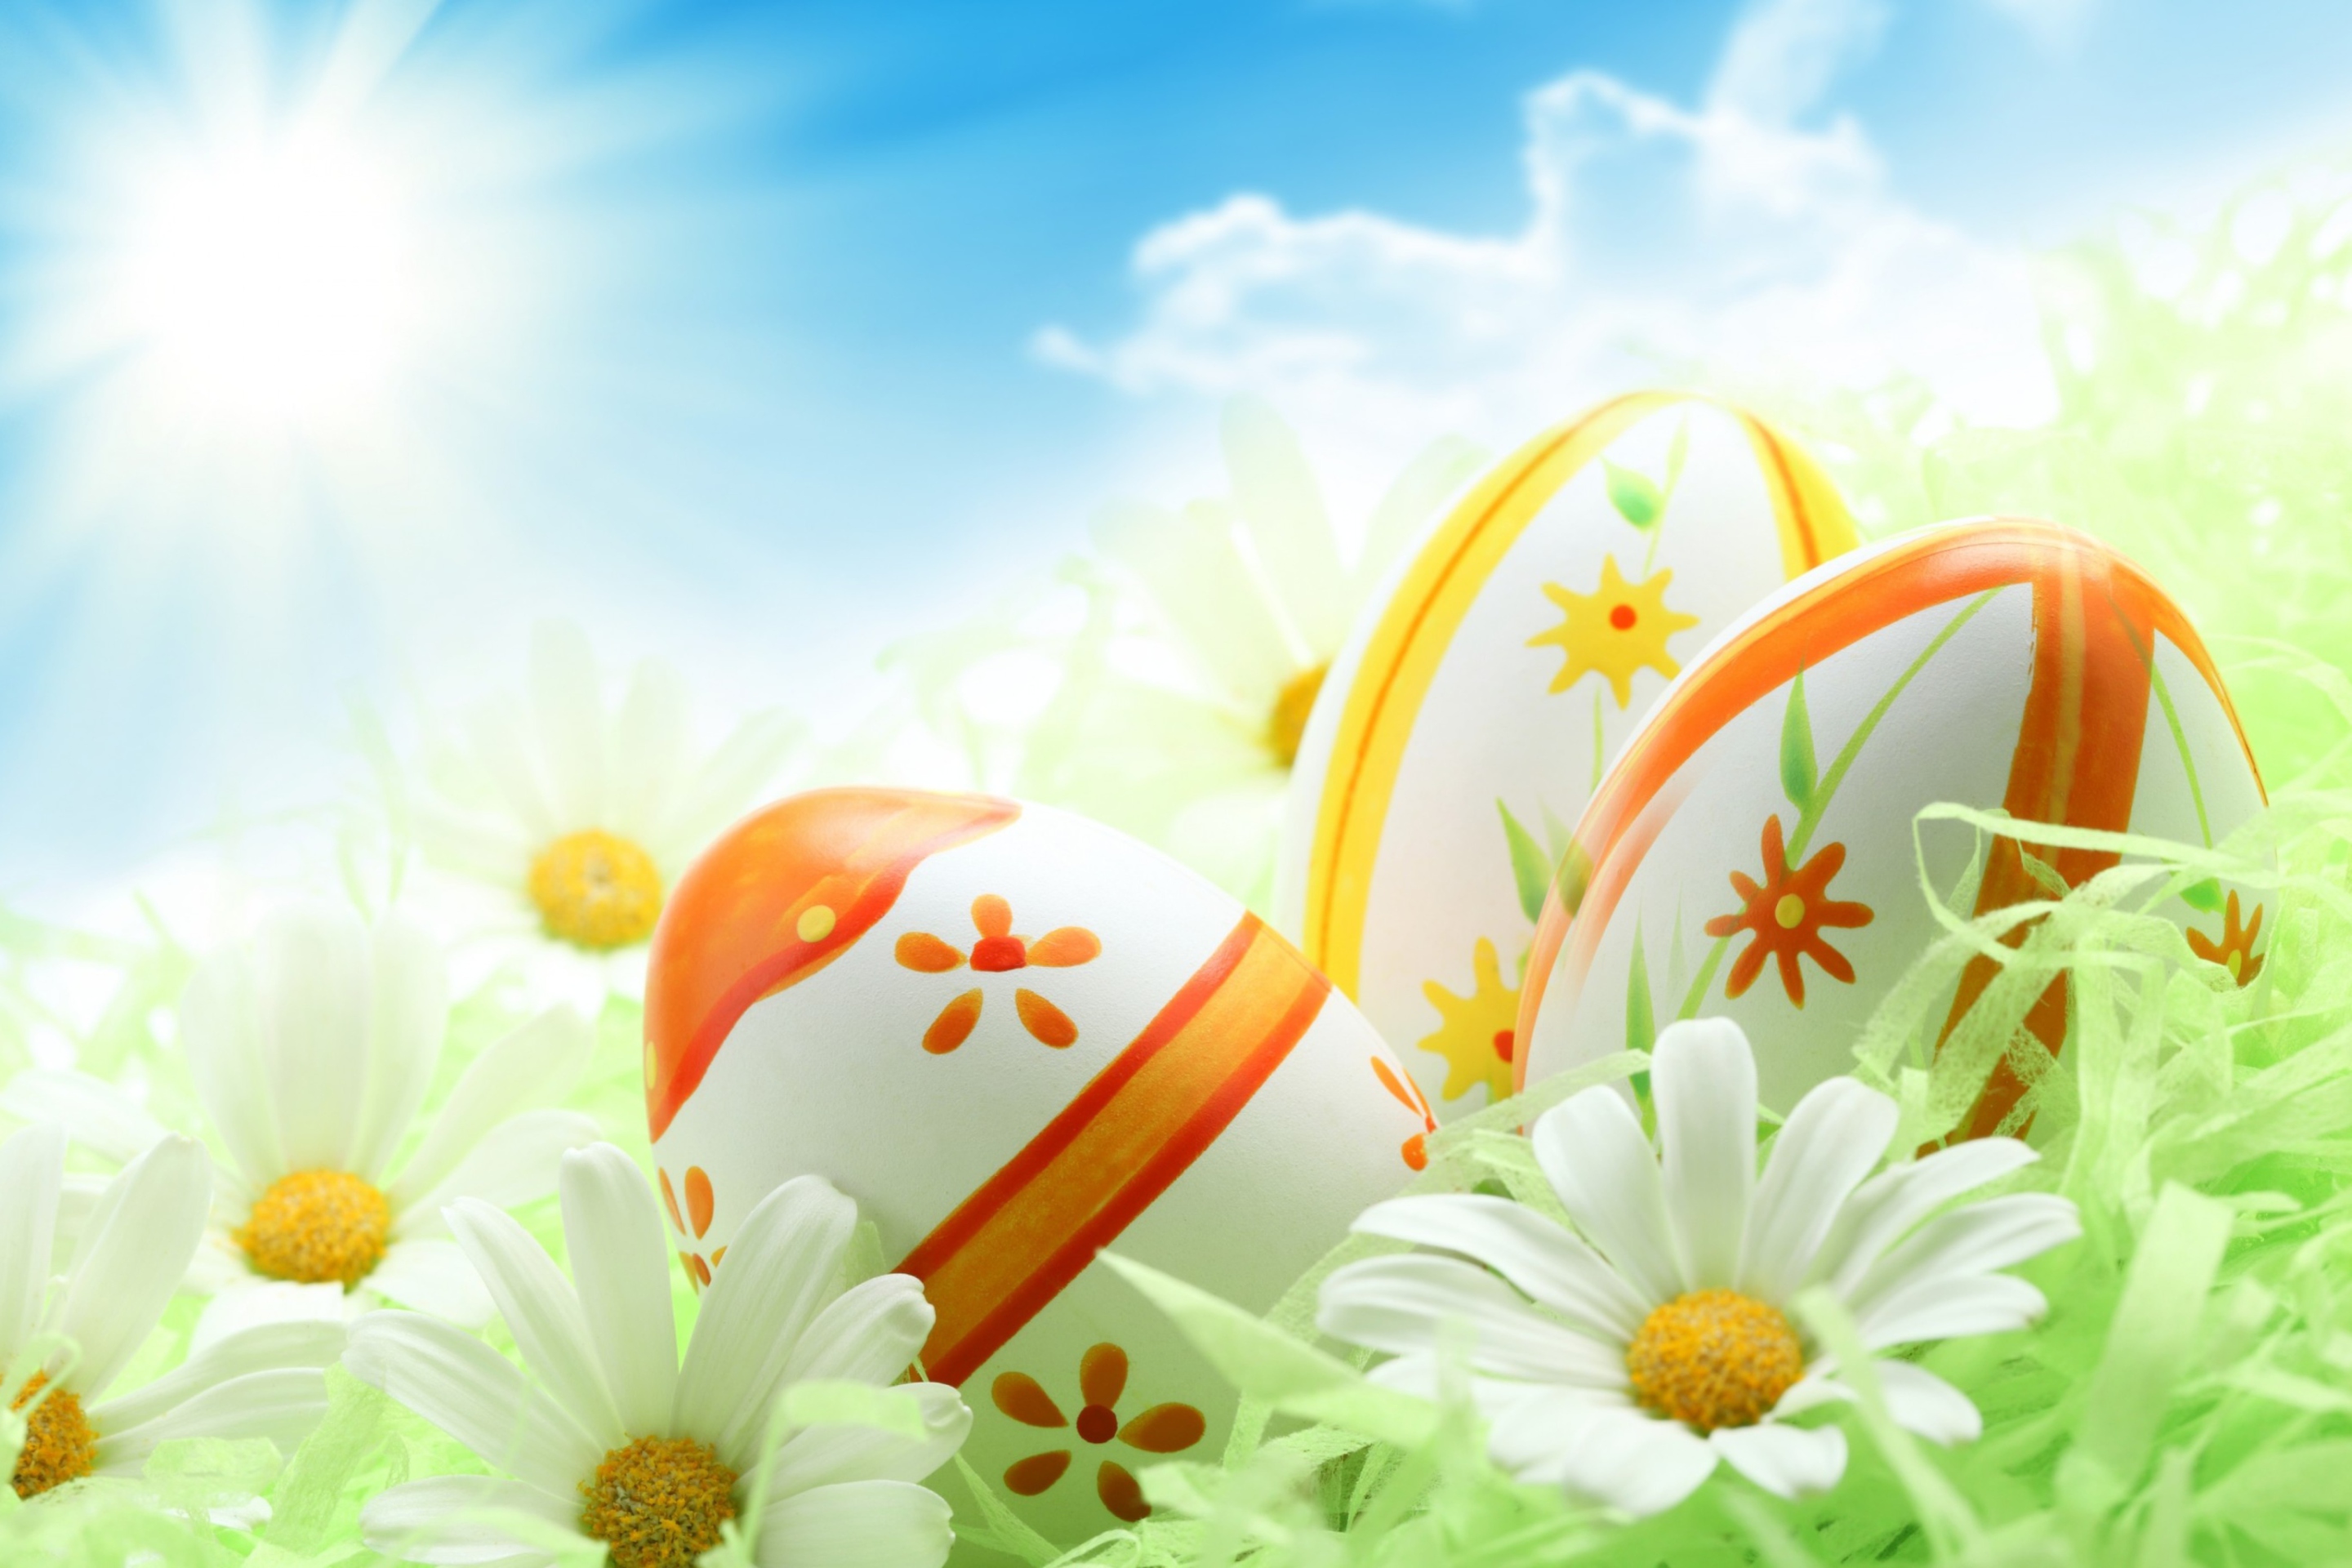 Easter Eggs And Daisies wallpaper 2880x1920